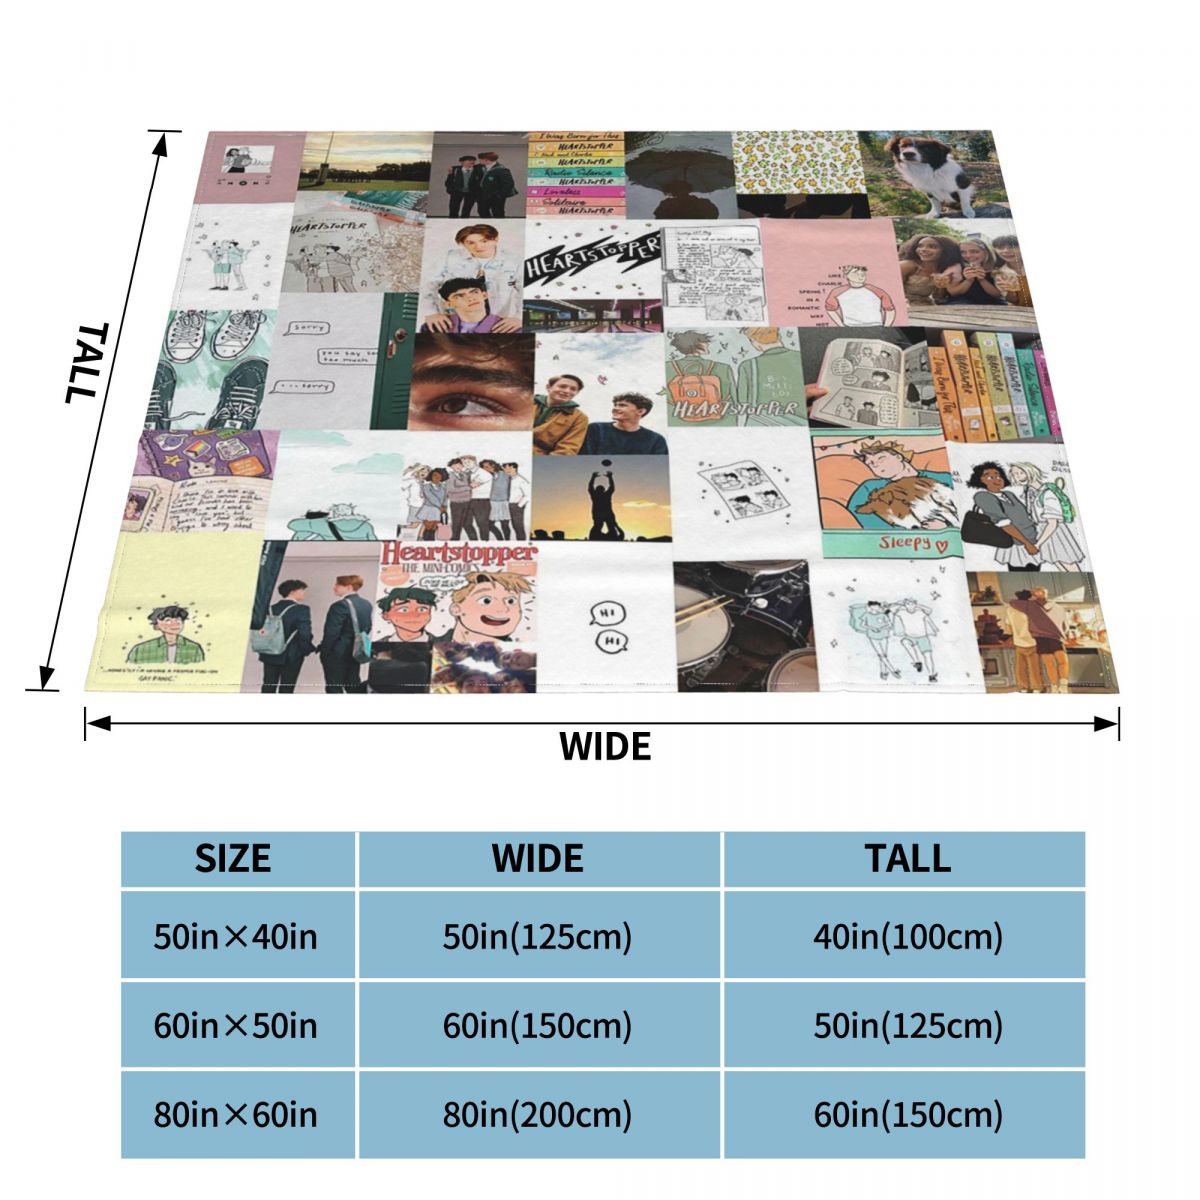 Heartstopper Plaid Blanket Sofa Cover Flannel Autumn/Winter Love Movie Collage Warm Throw Blankets for Home Travel Bedspread